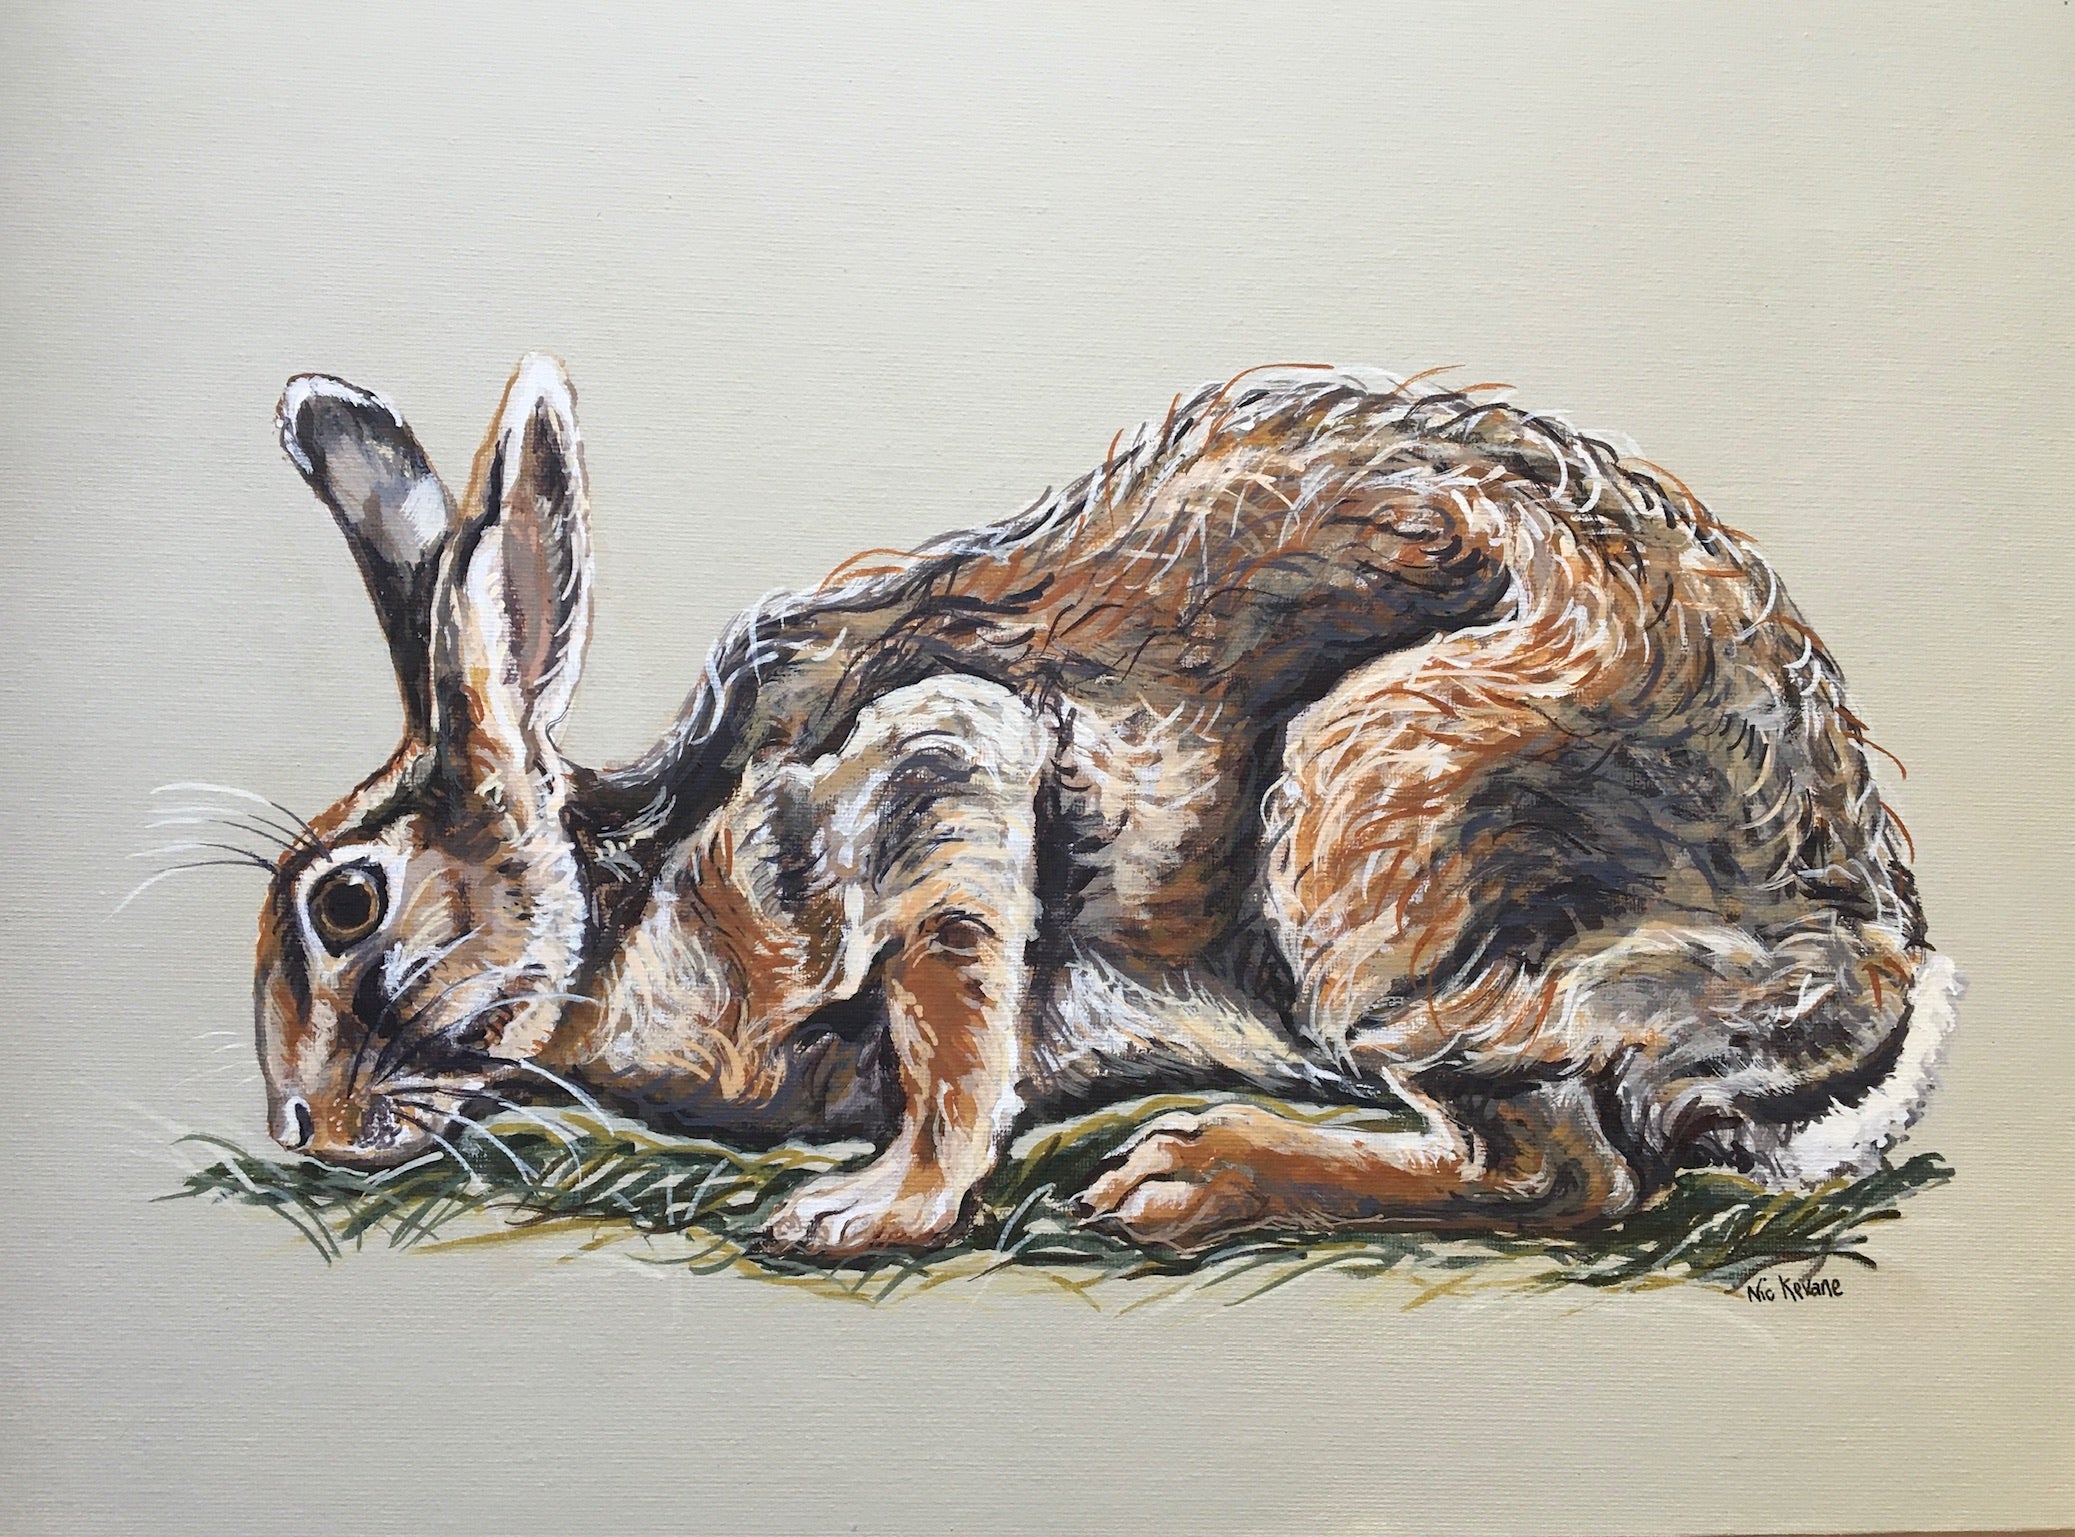 A painting of a grazing hare. The artistic rendering of the fur accentuates the fluidity of the hare’s form. 